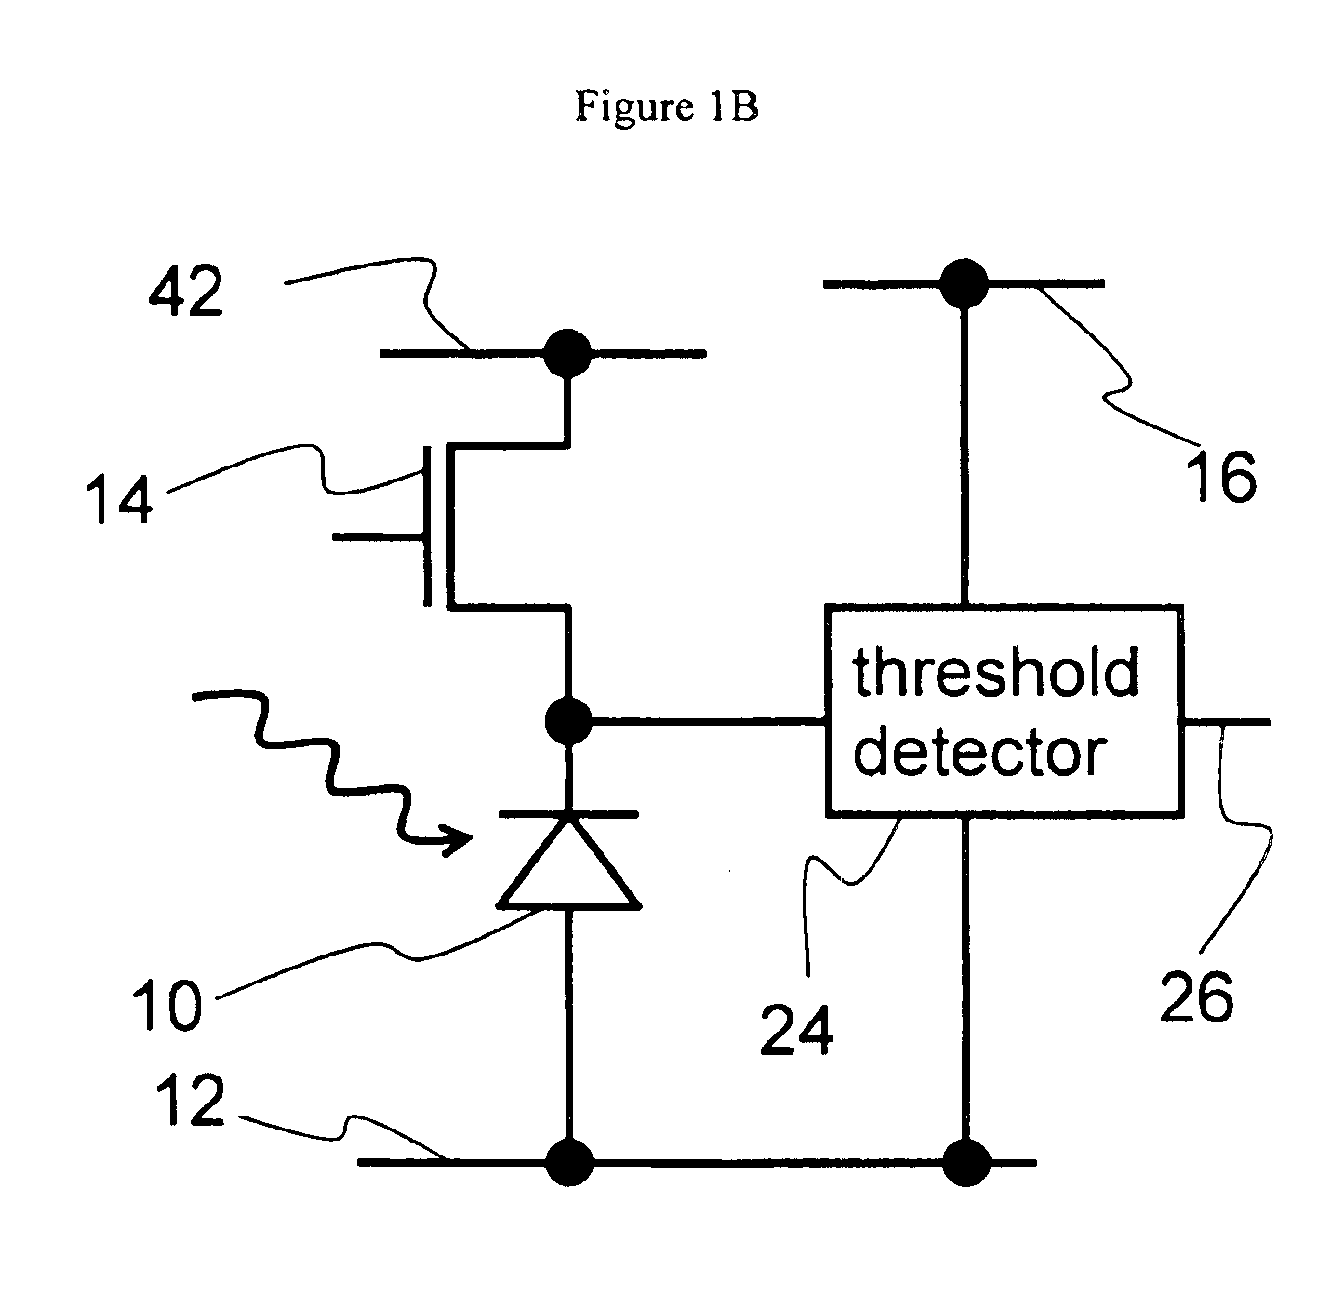 Differential time-to-threshold A/D conversion in digital imaging arrays